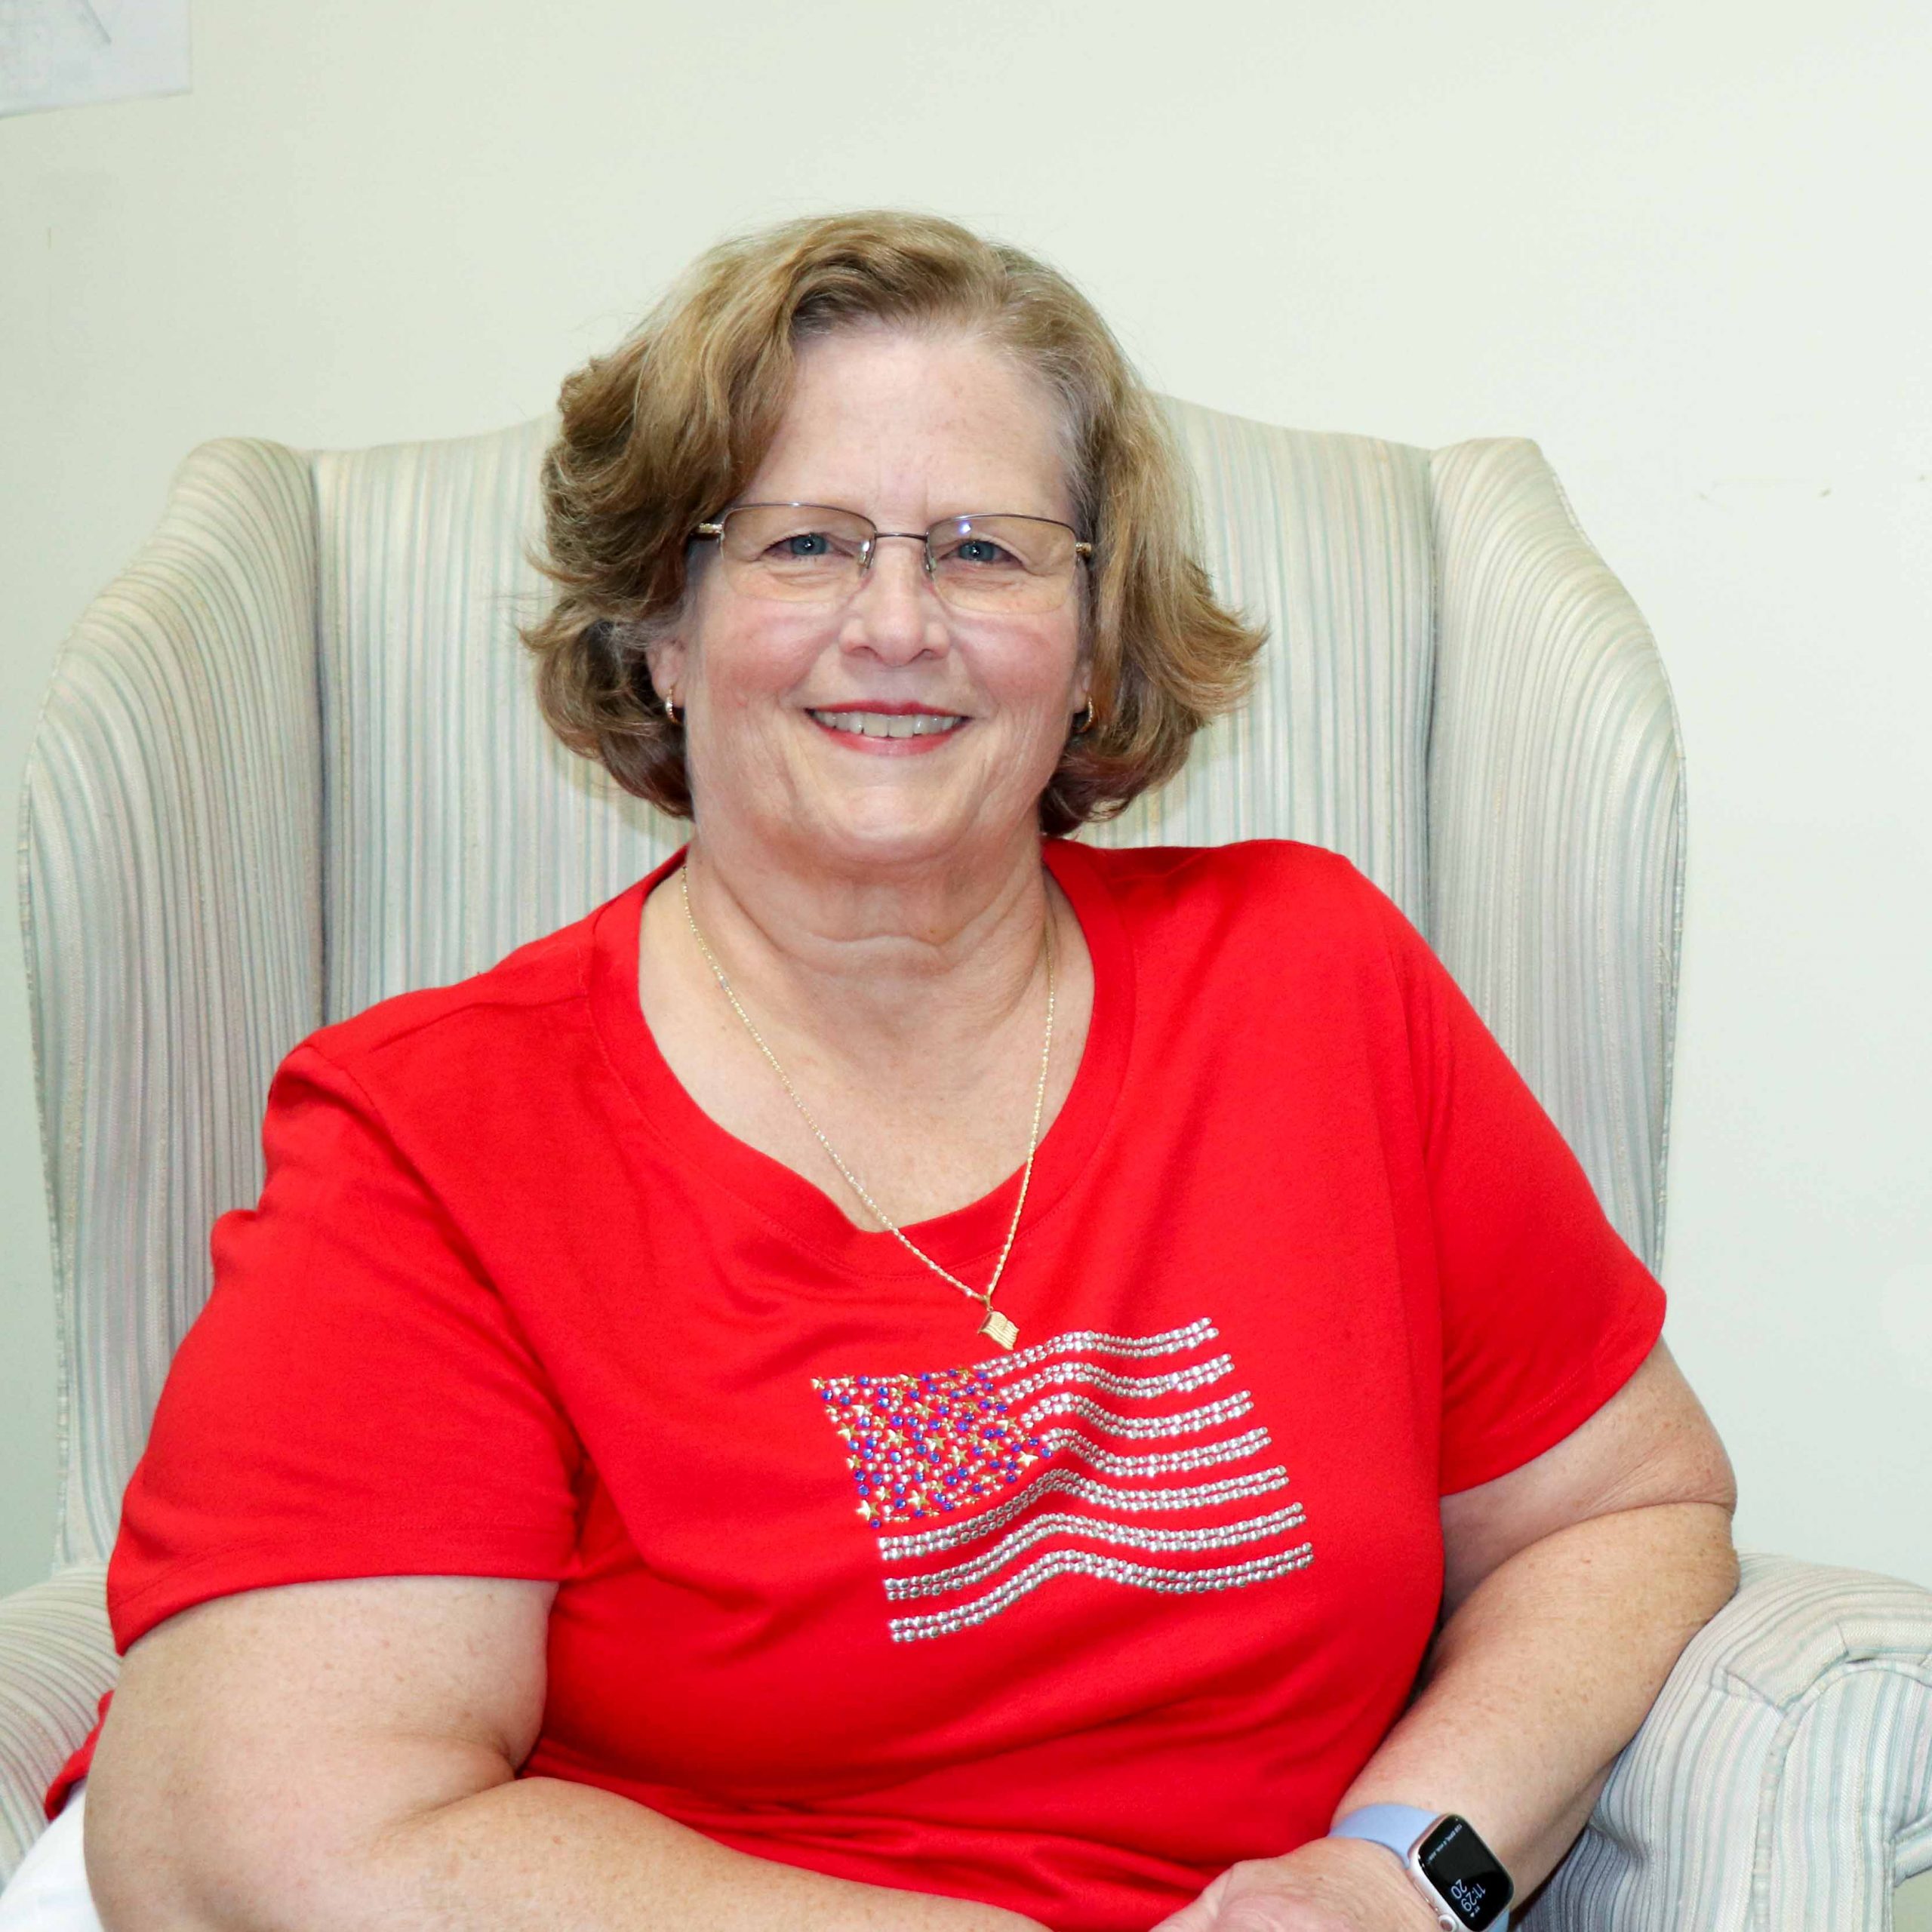 SABQG vice president Kathye DeLuca wearing a red shirt with american flag